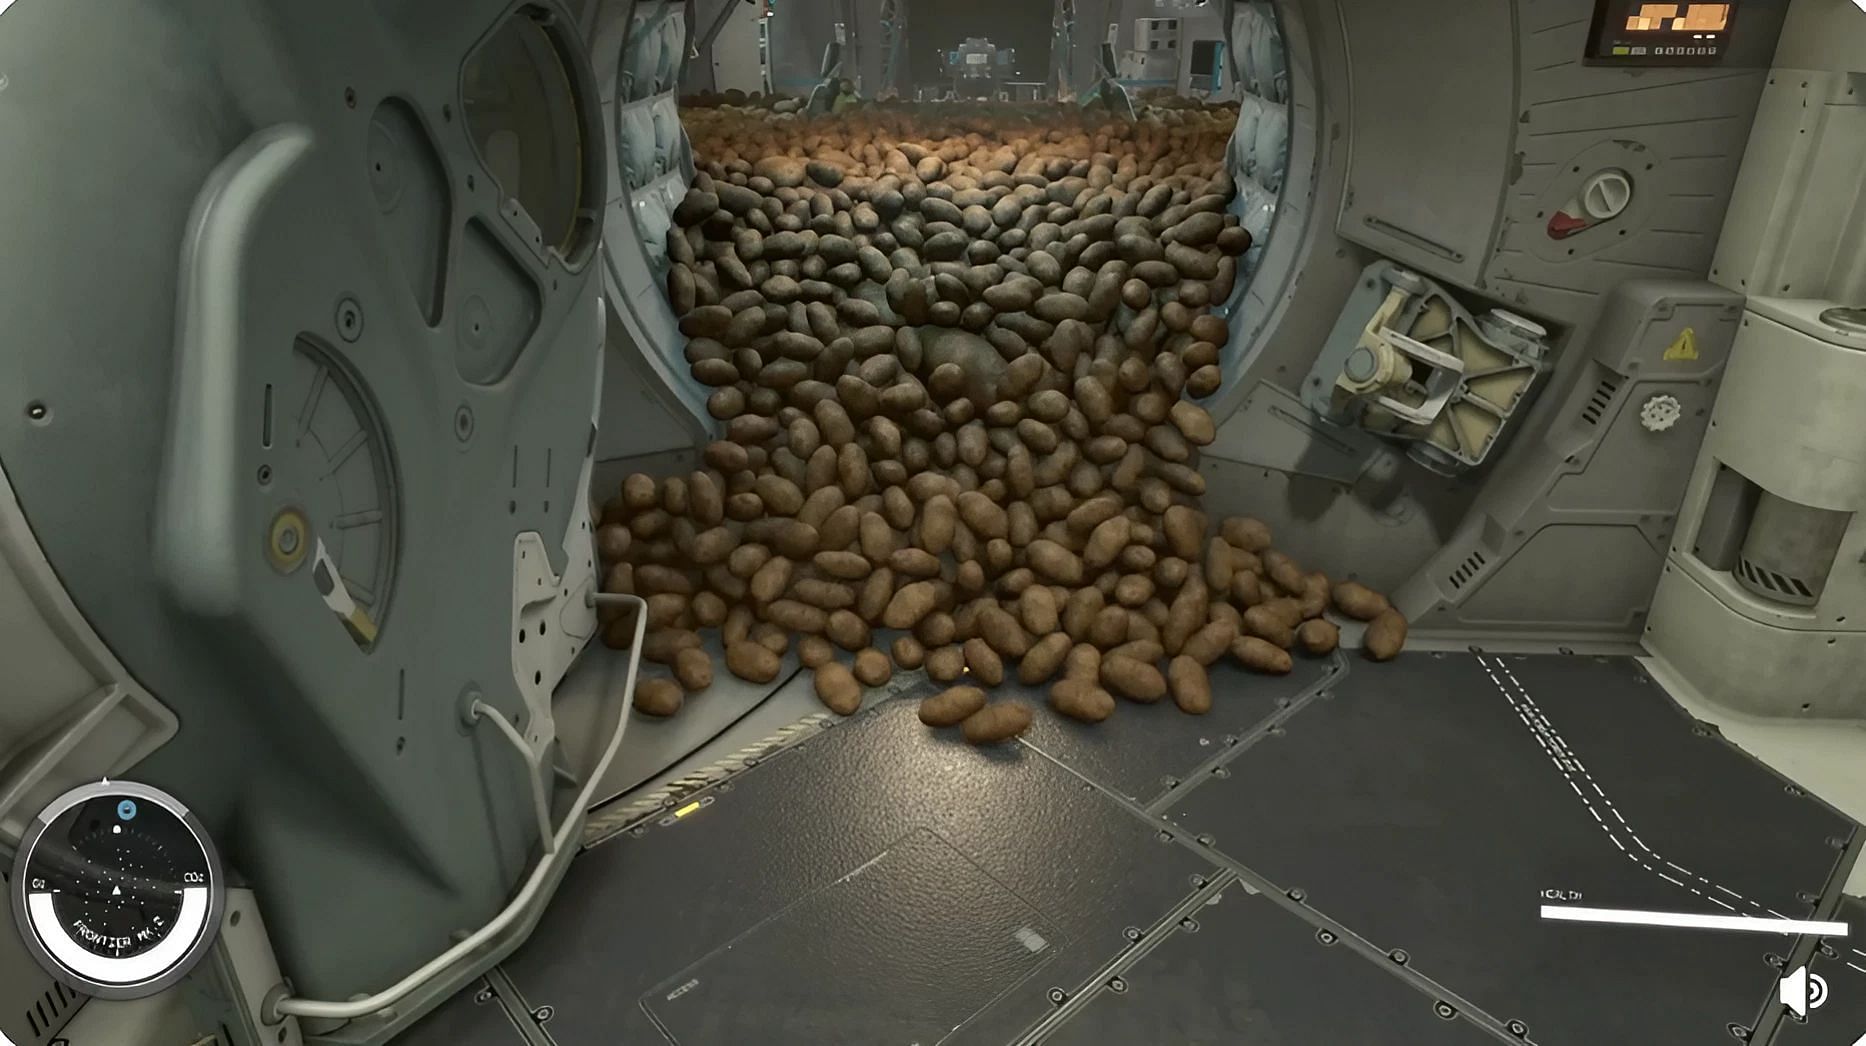 Starfields 20,000 potatoes in spaceship is a true testimony of incredible in-game physics from Bethesda